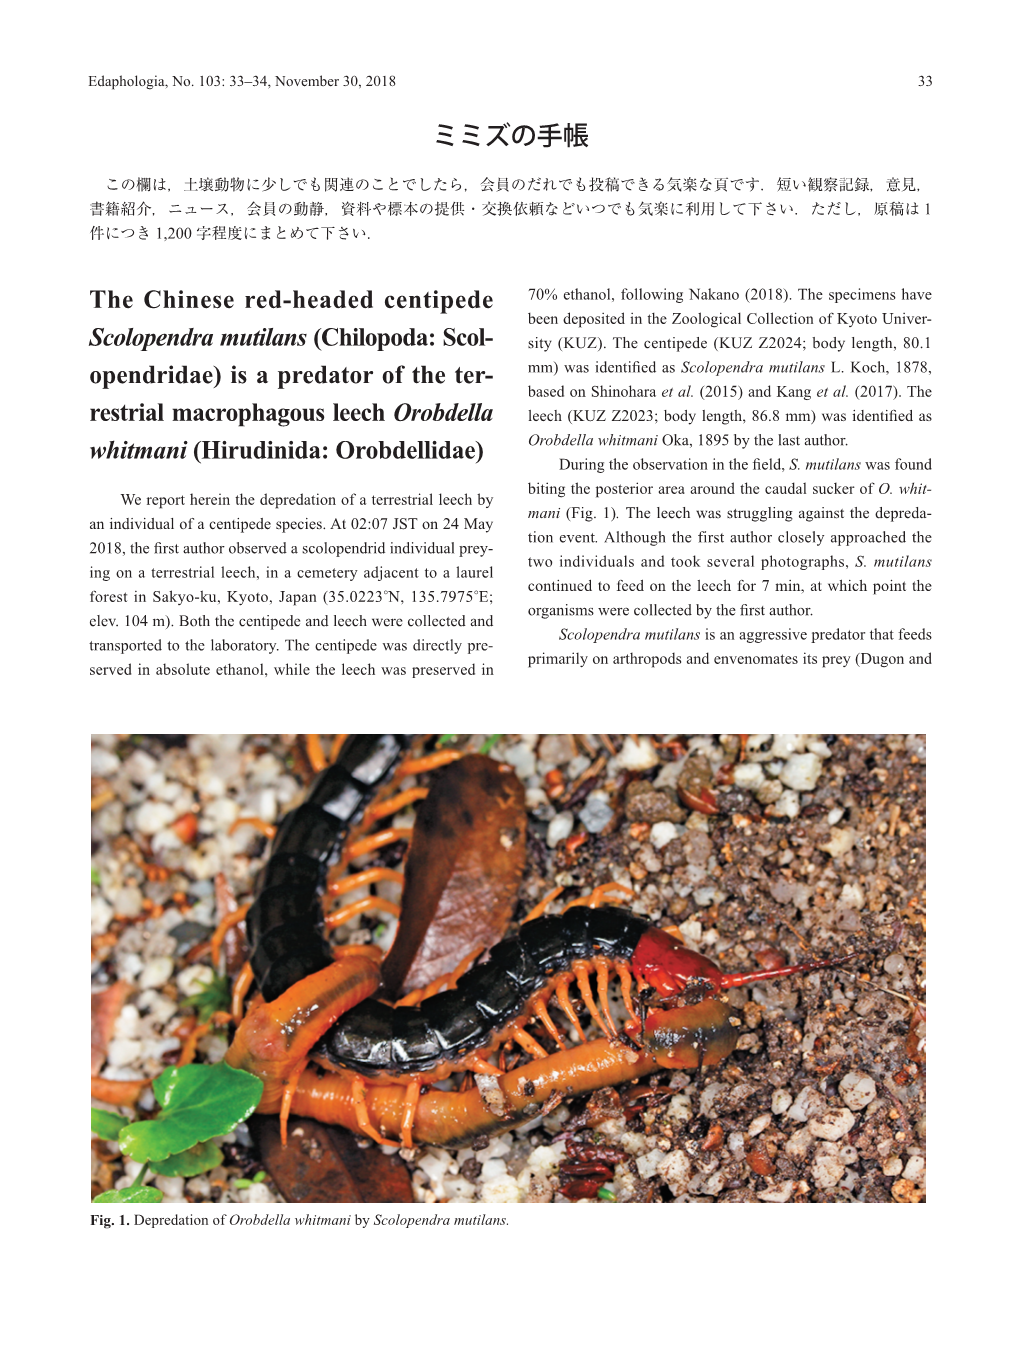 The Chinese Red-Headed Centipede Scolopendra Mutilans